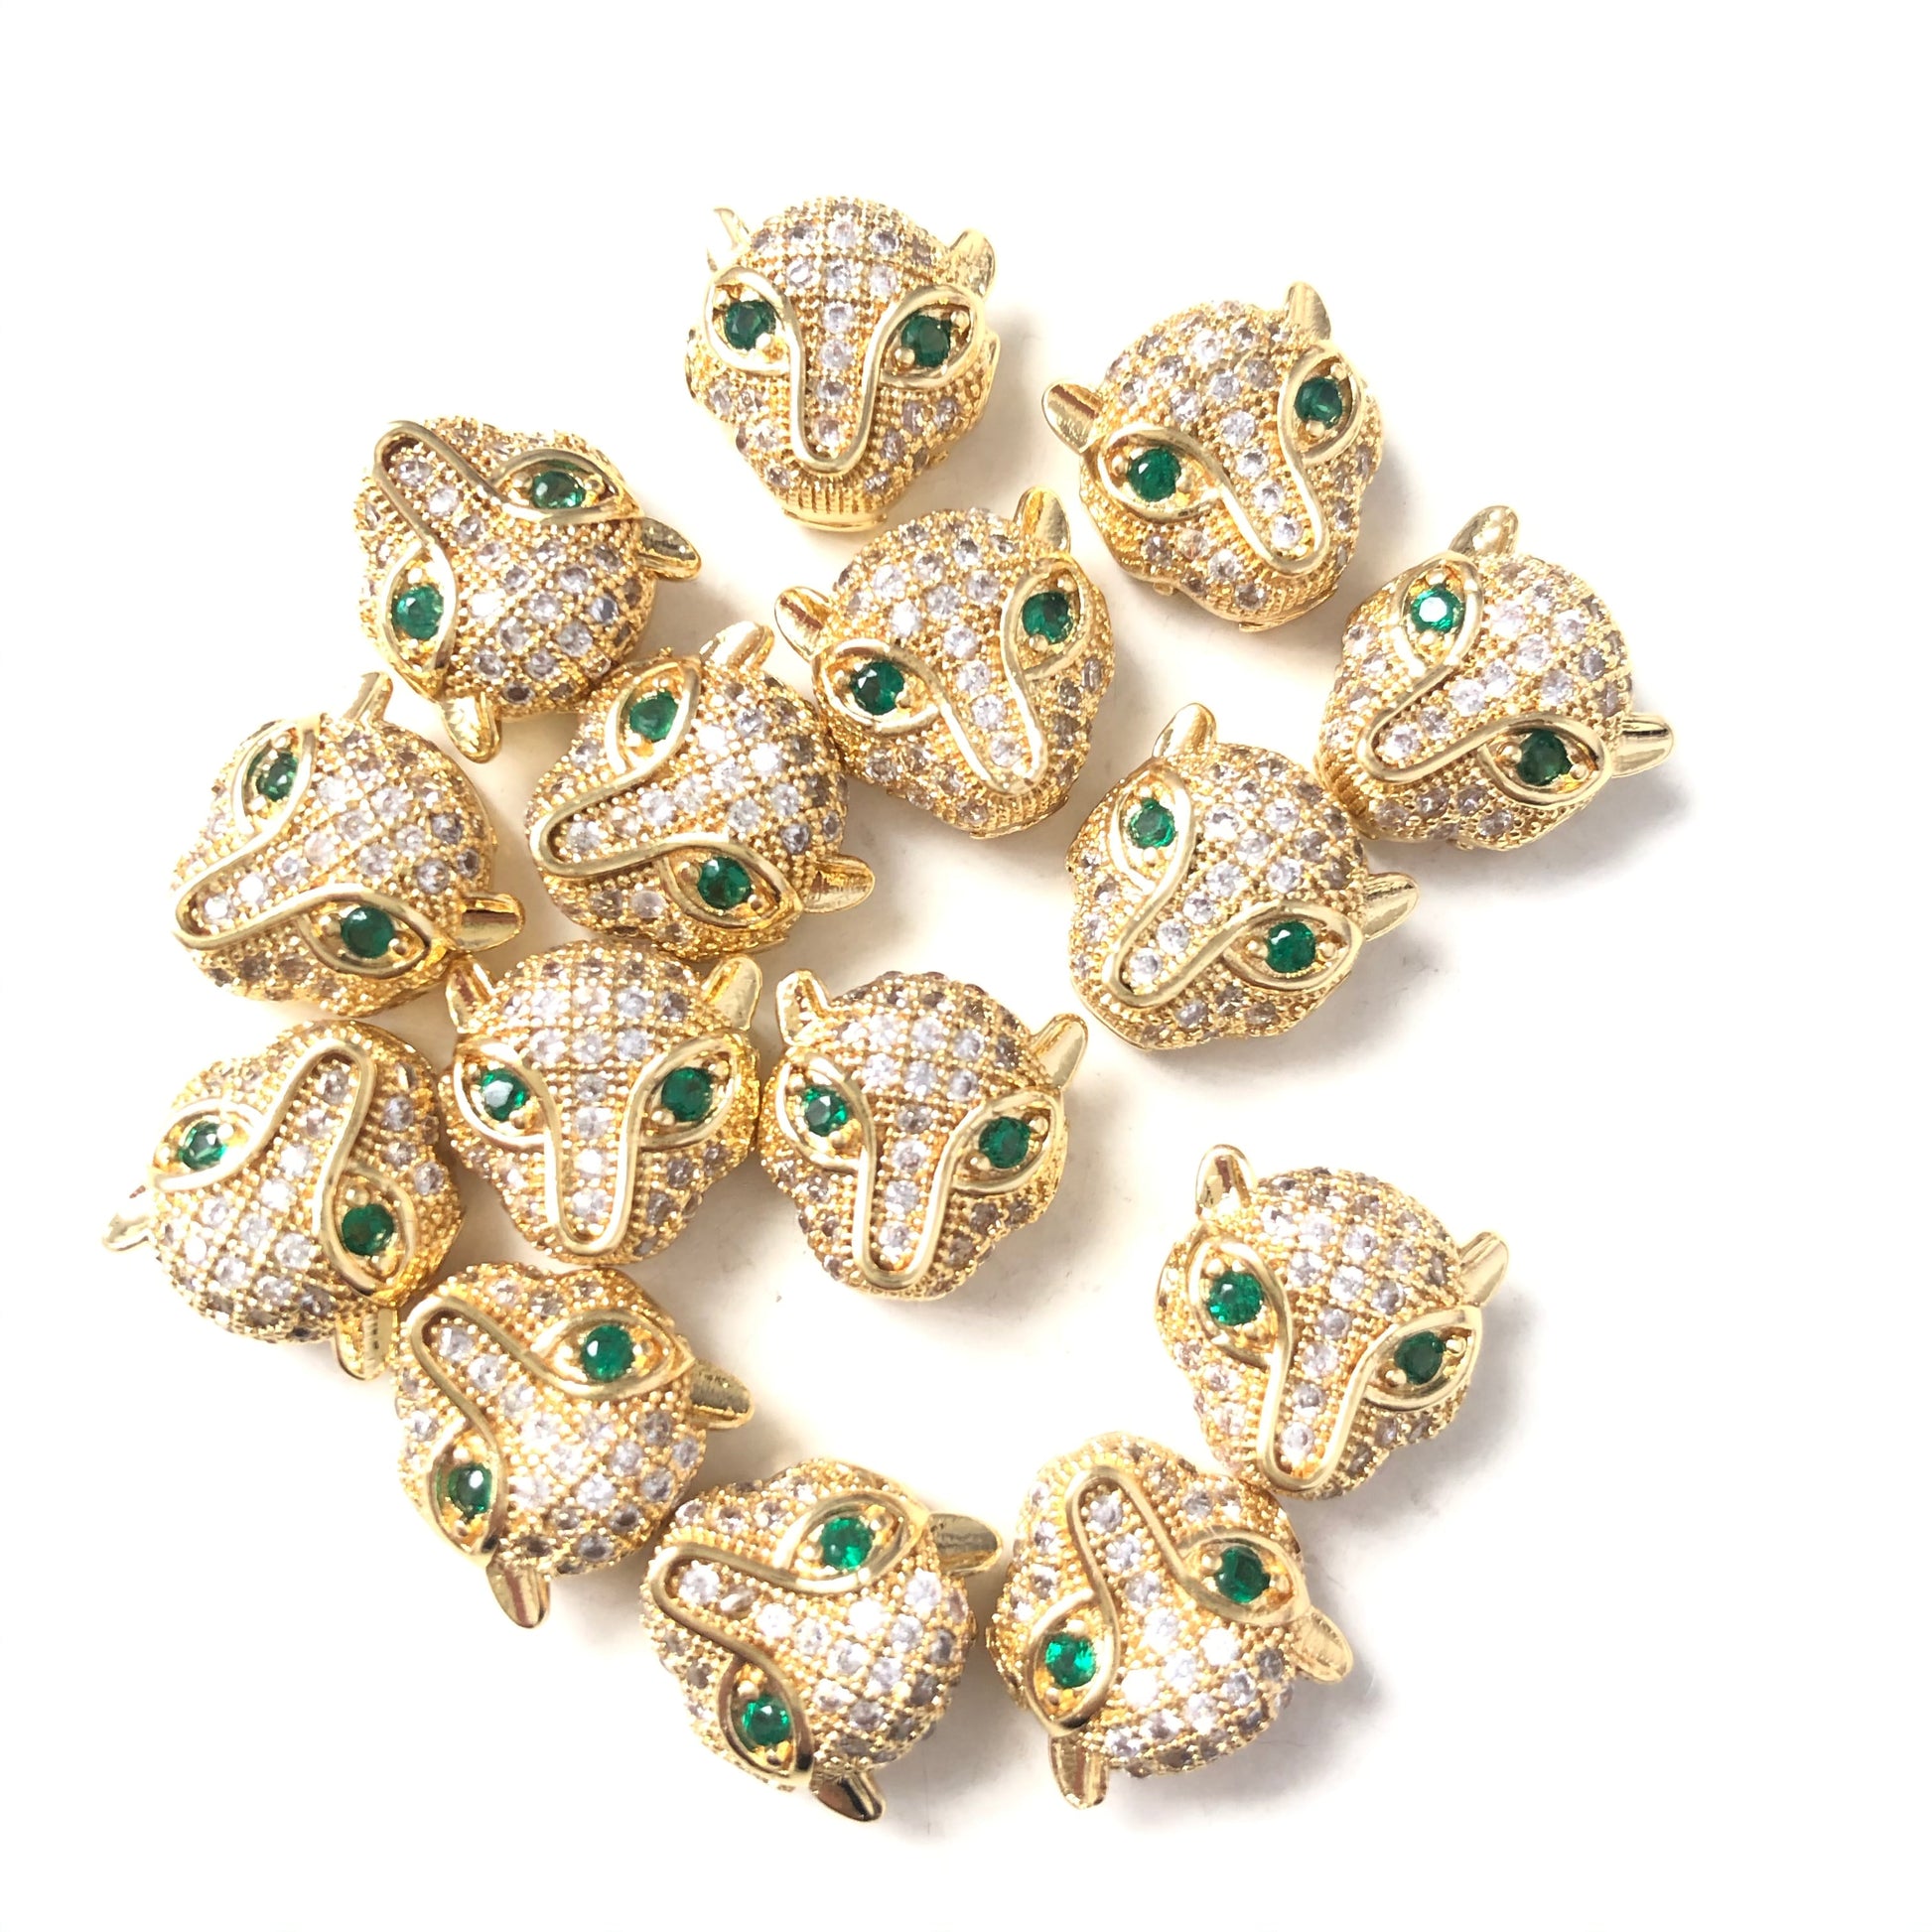 20pcs/lot Clear CZ Paved Panther Head Spacers Gold CZ Paved Spacers Animal Spacers Charms Beads Beyond